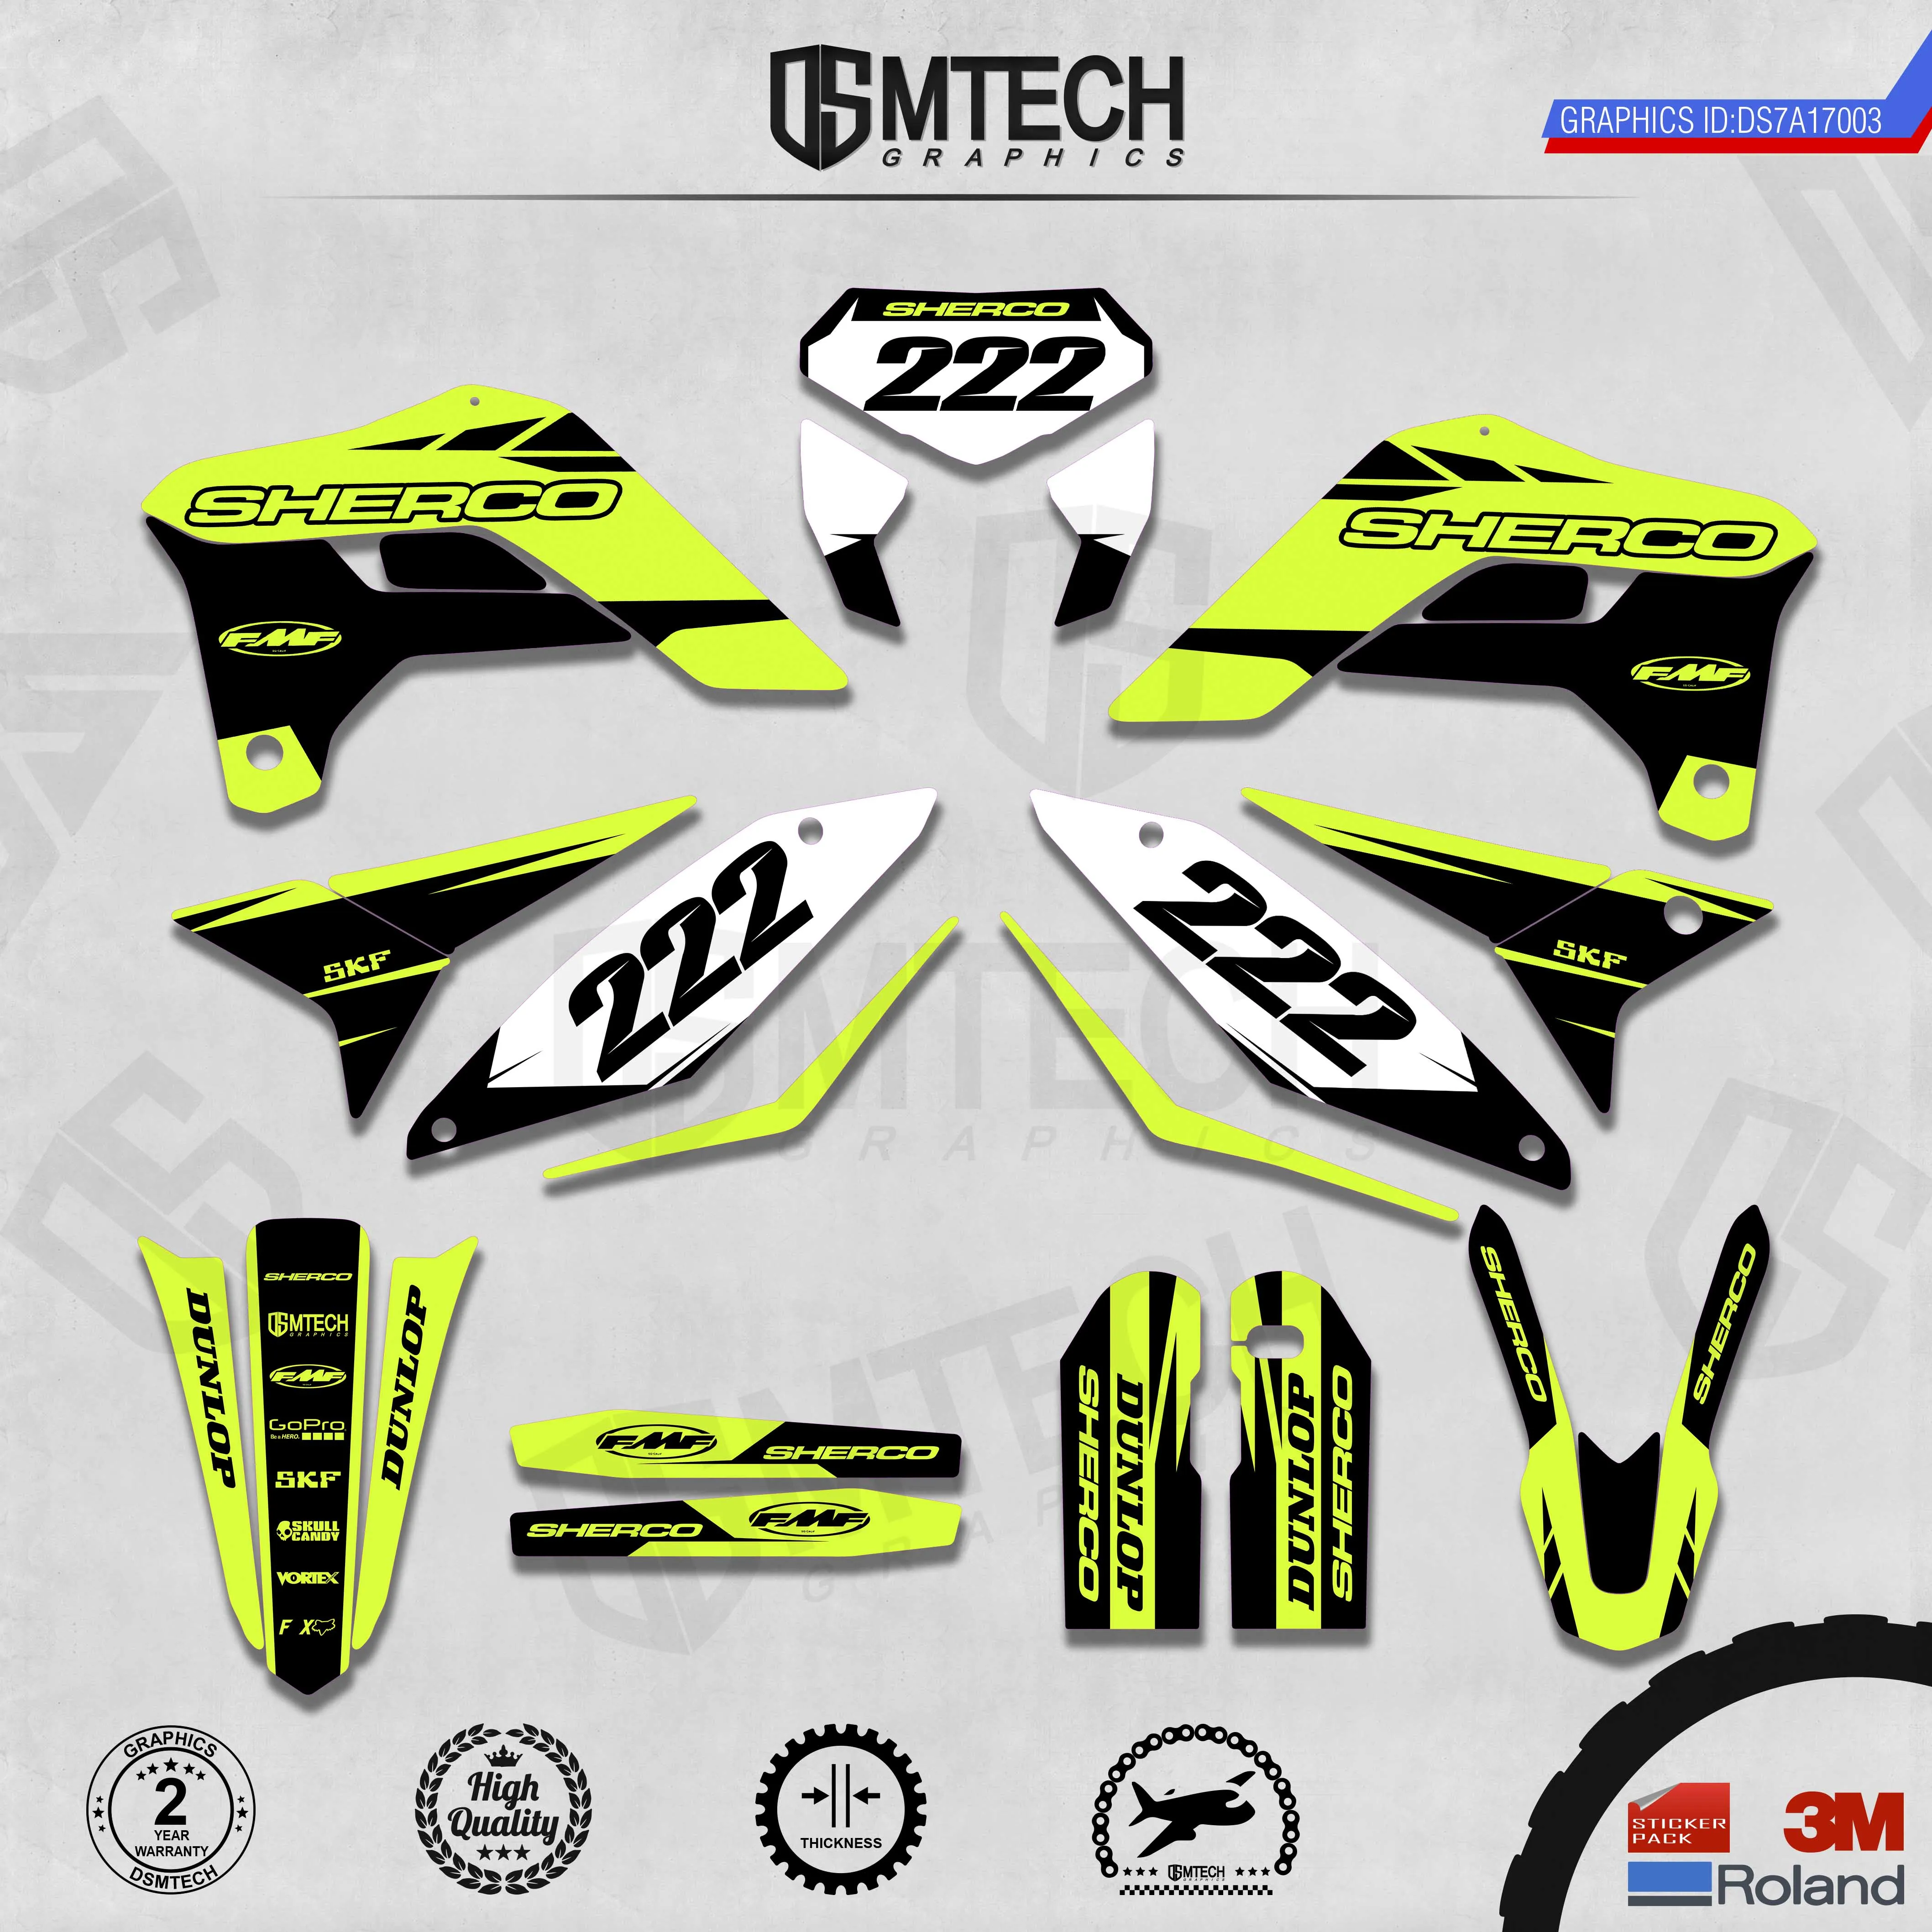 dsmtech-custom-team-graphics-decals-3m-stickers-kit-for-sherco-sticker-2017-2018-2019-2020-se-sef-003